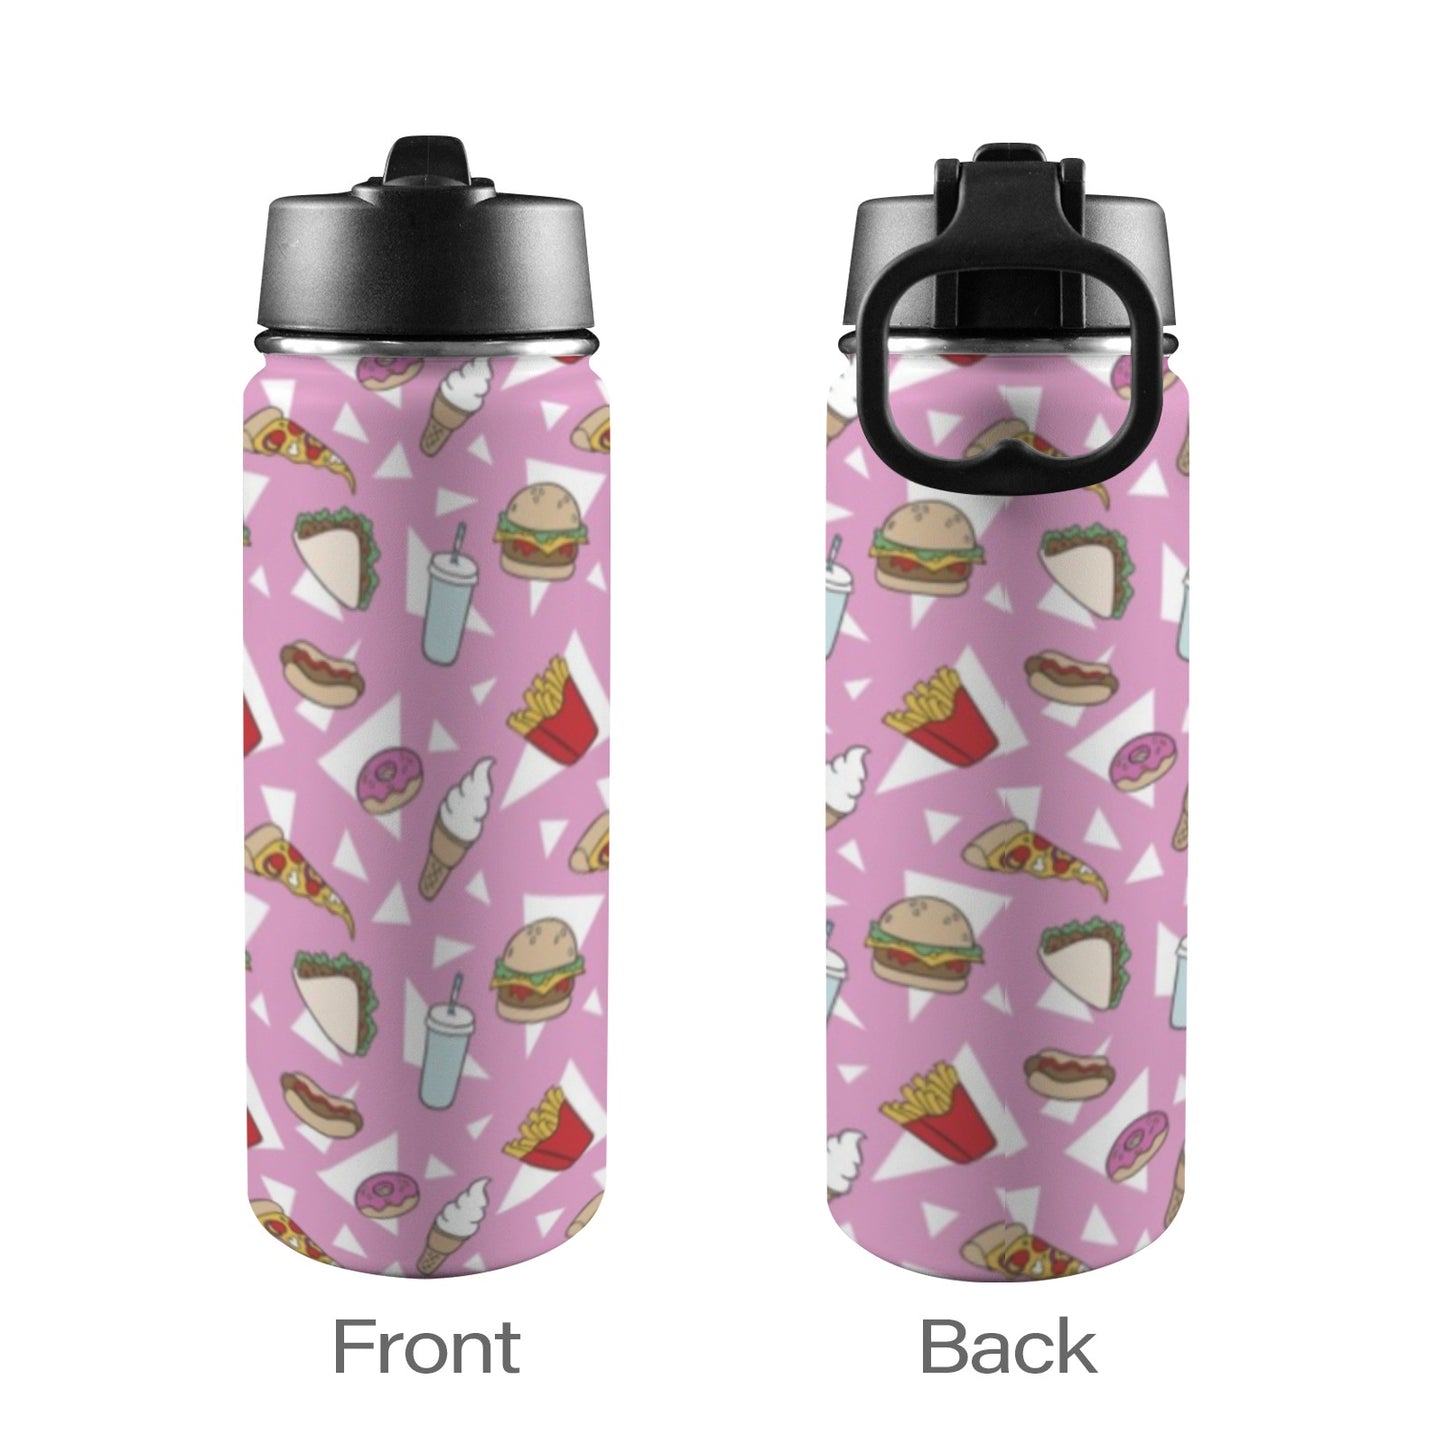 Fast Food - Insulated Water Bottle with Straw Lid (18oz) Insulated Water Bottle with Swing Handle